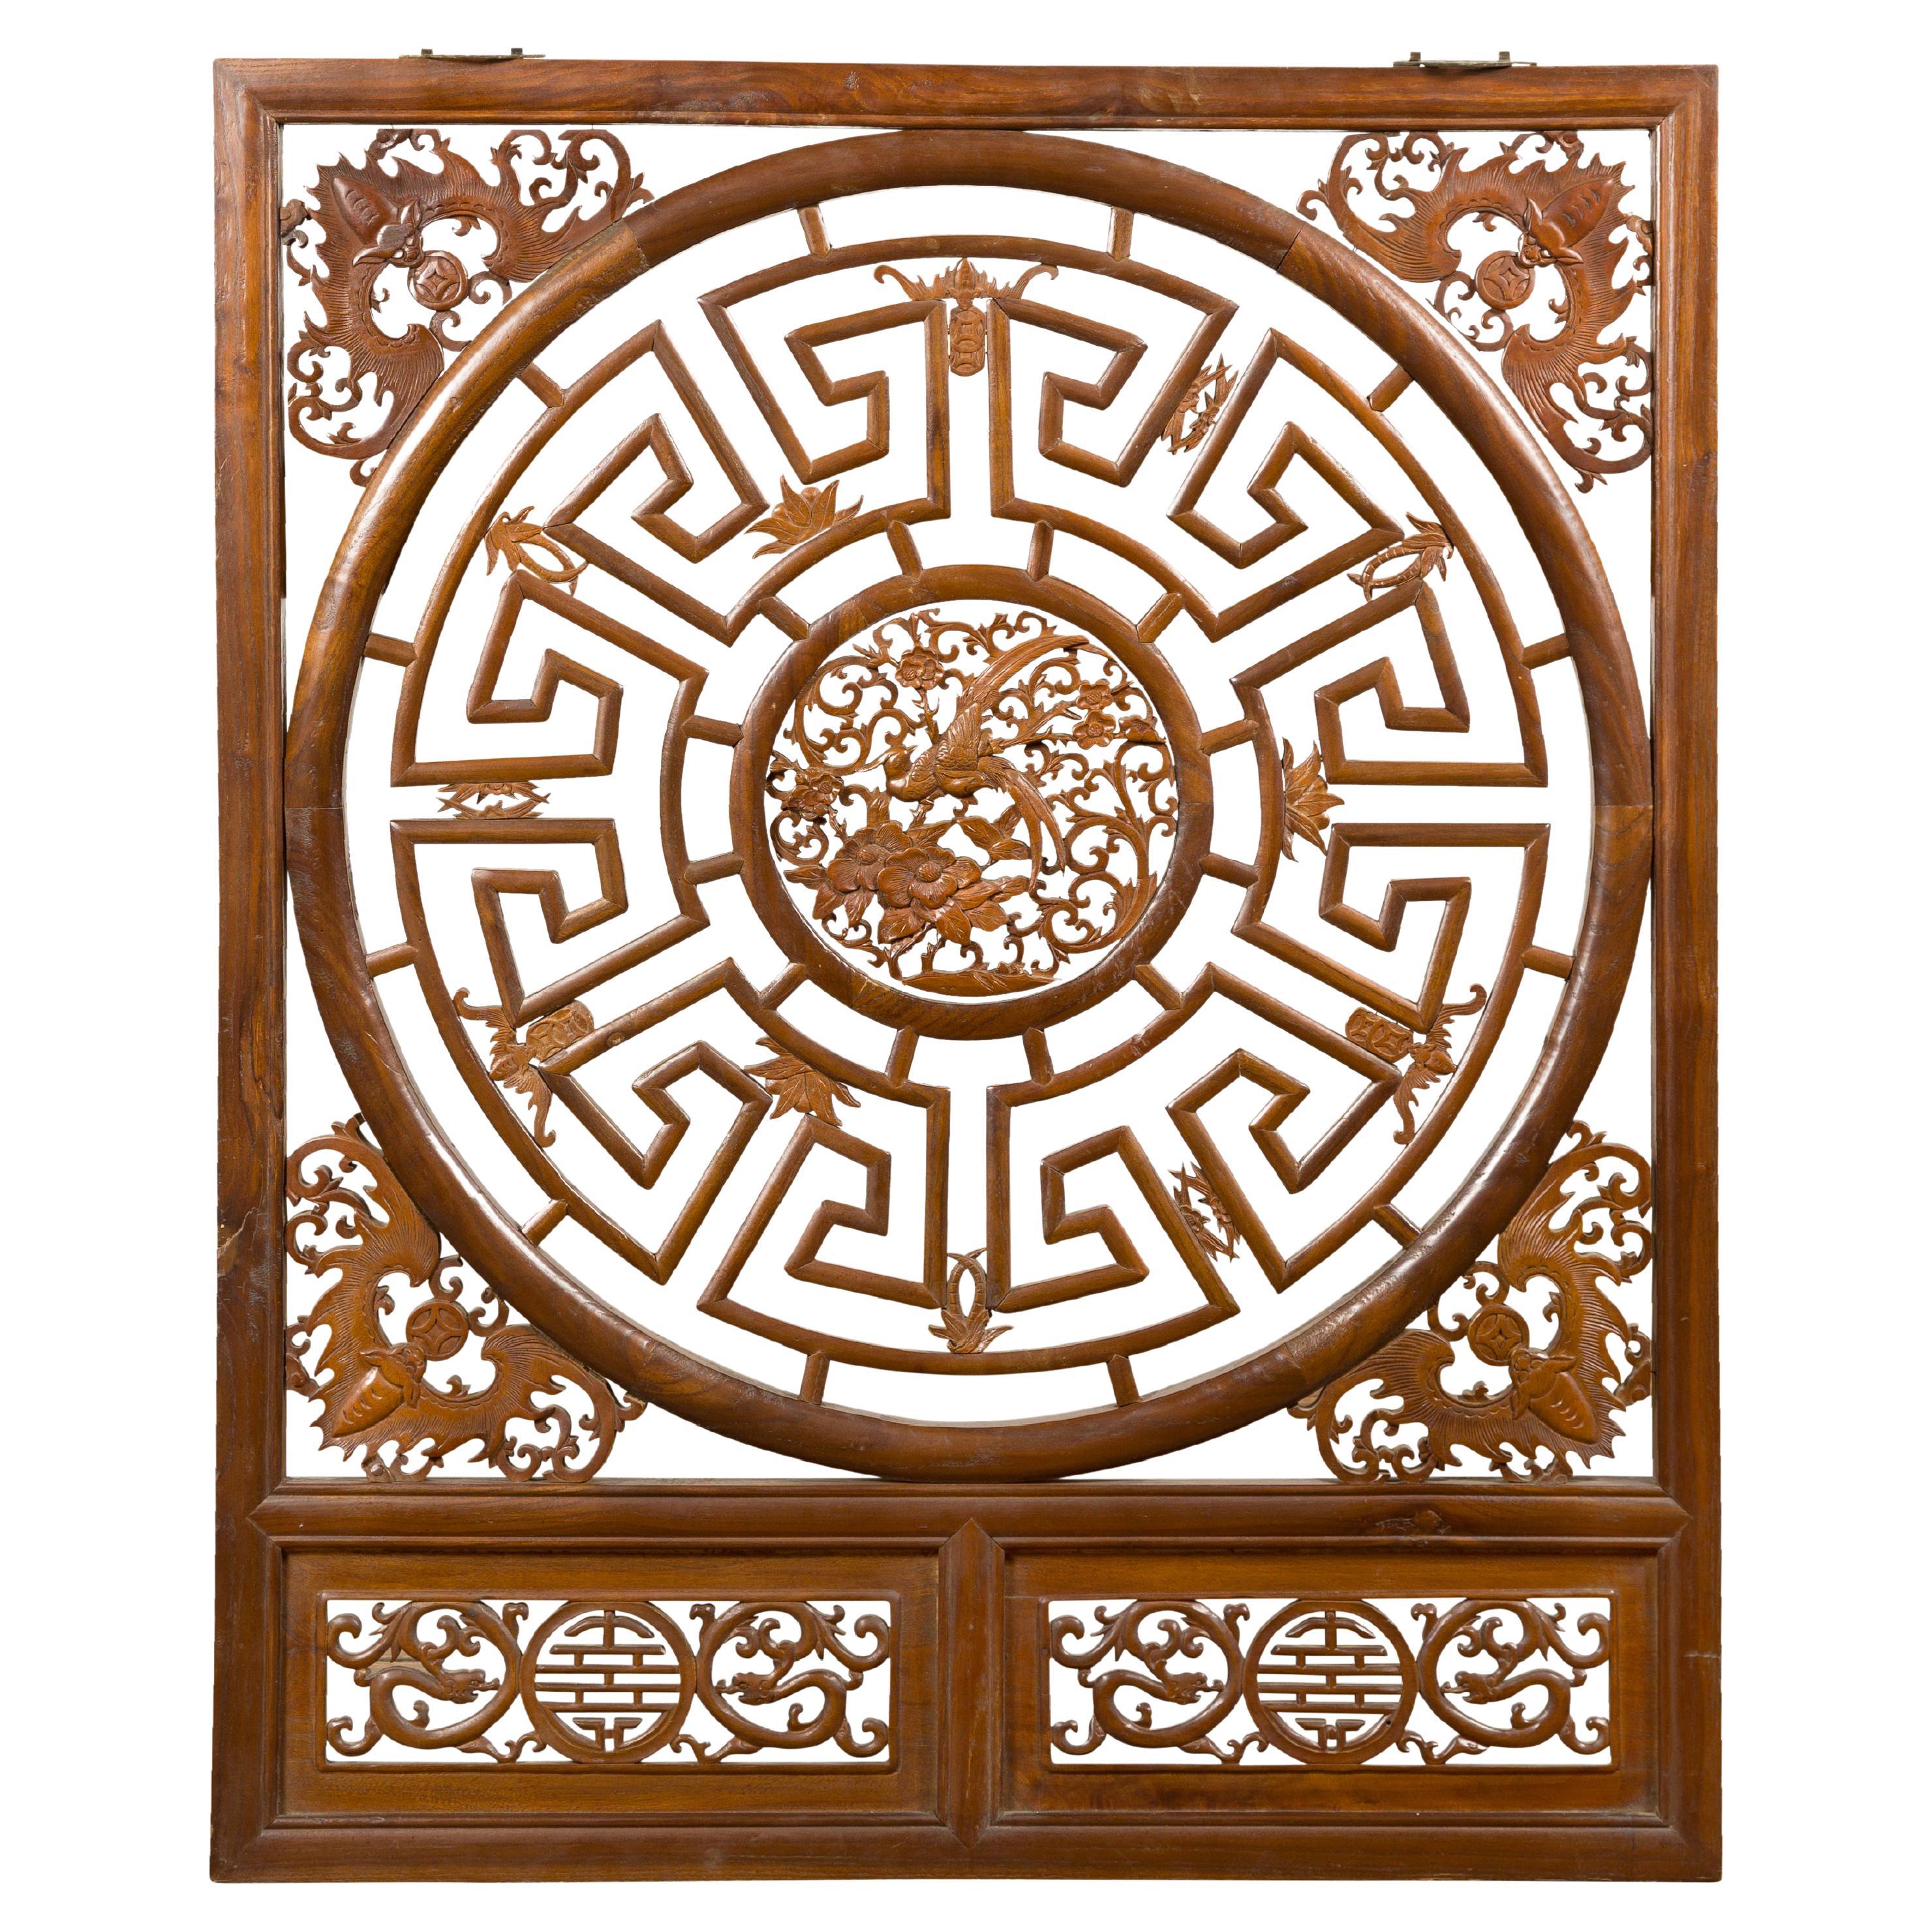 Chinese Late Qing Dynasty Fretwork Panel with Phoenix, Bats and Geometric Maze For Sale